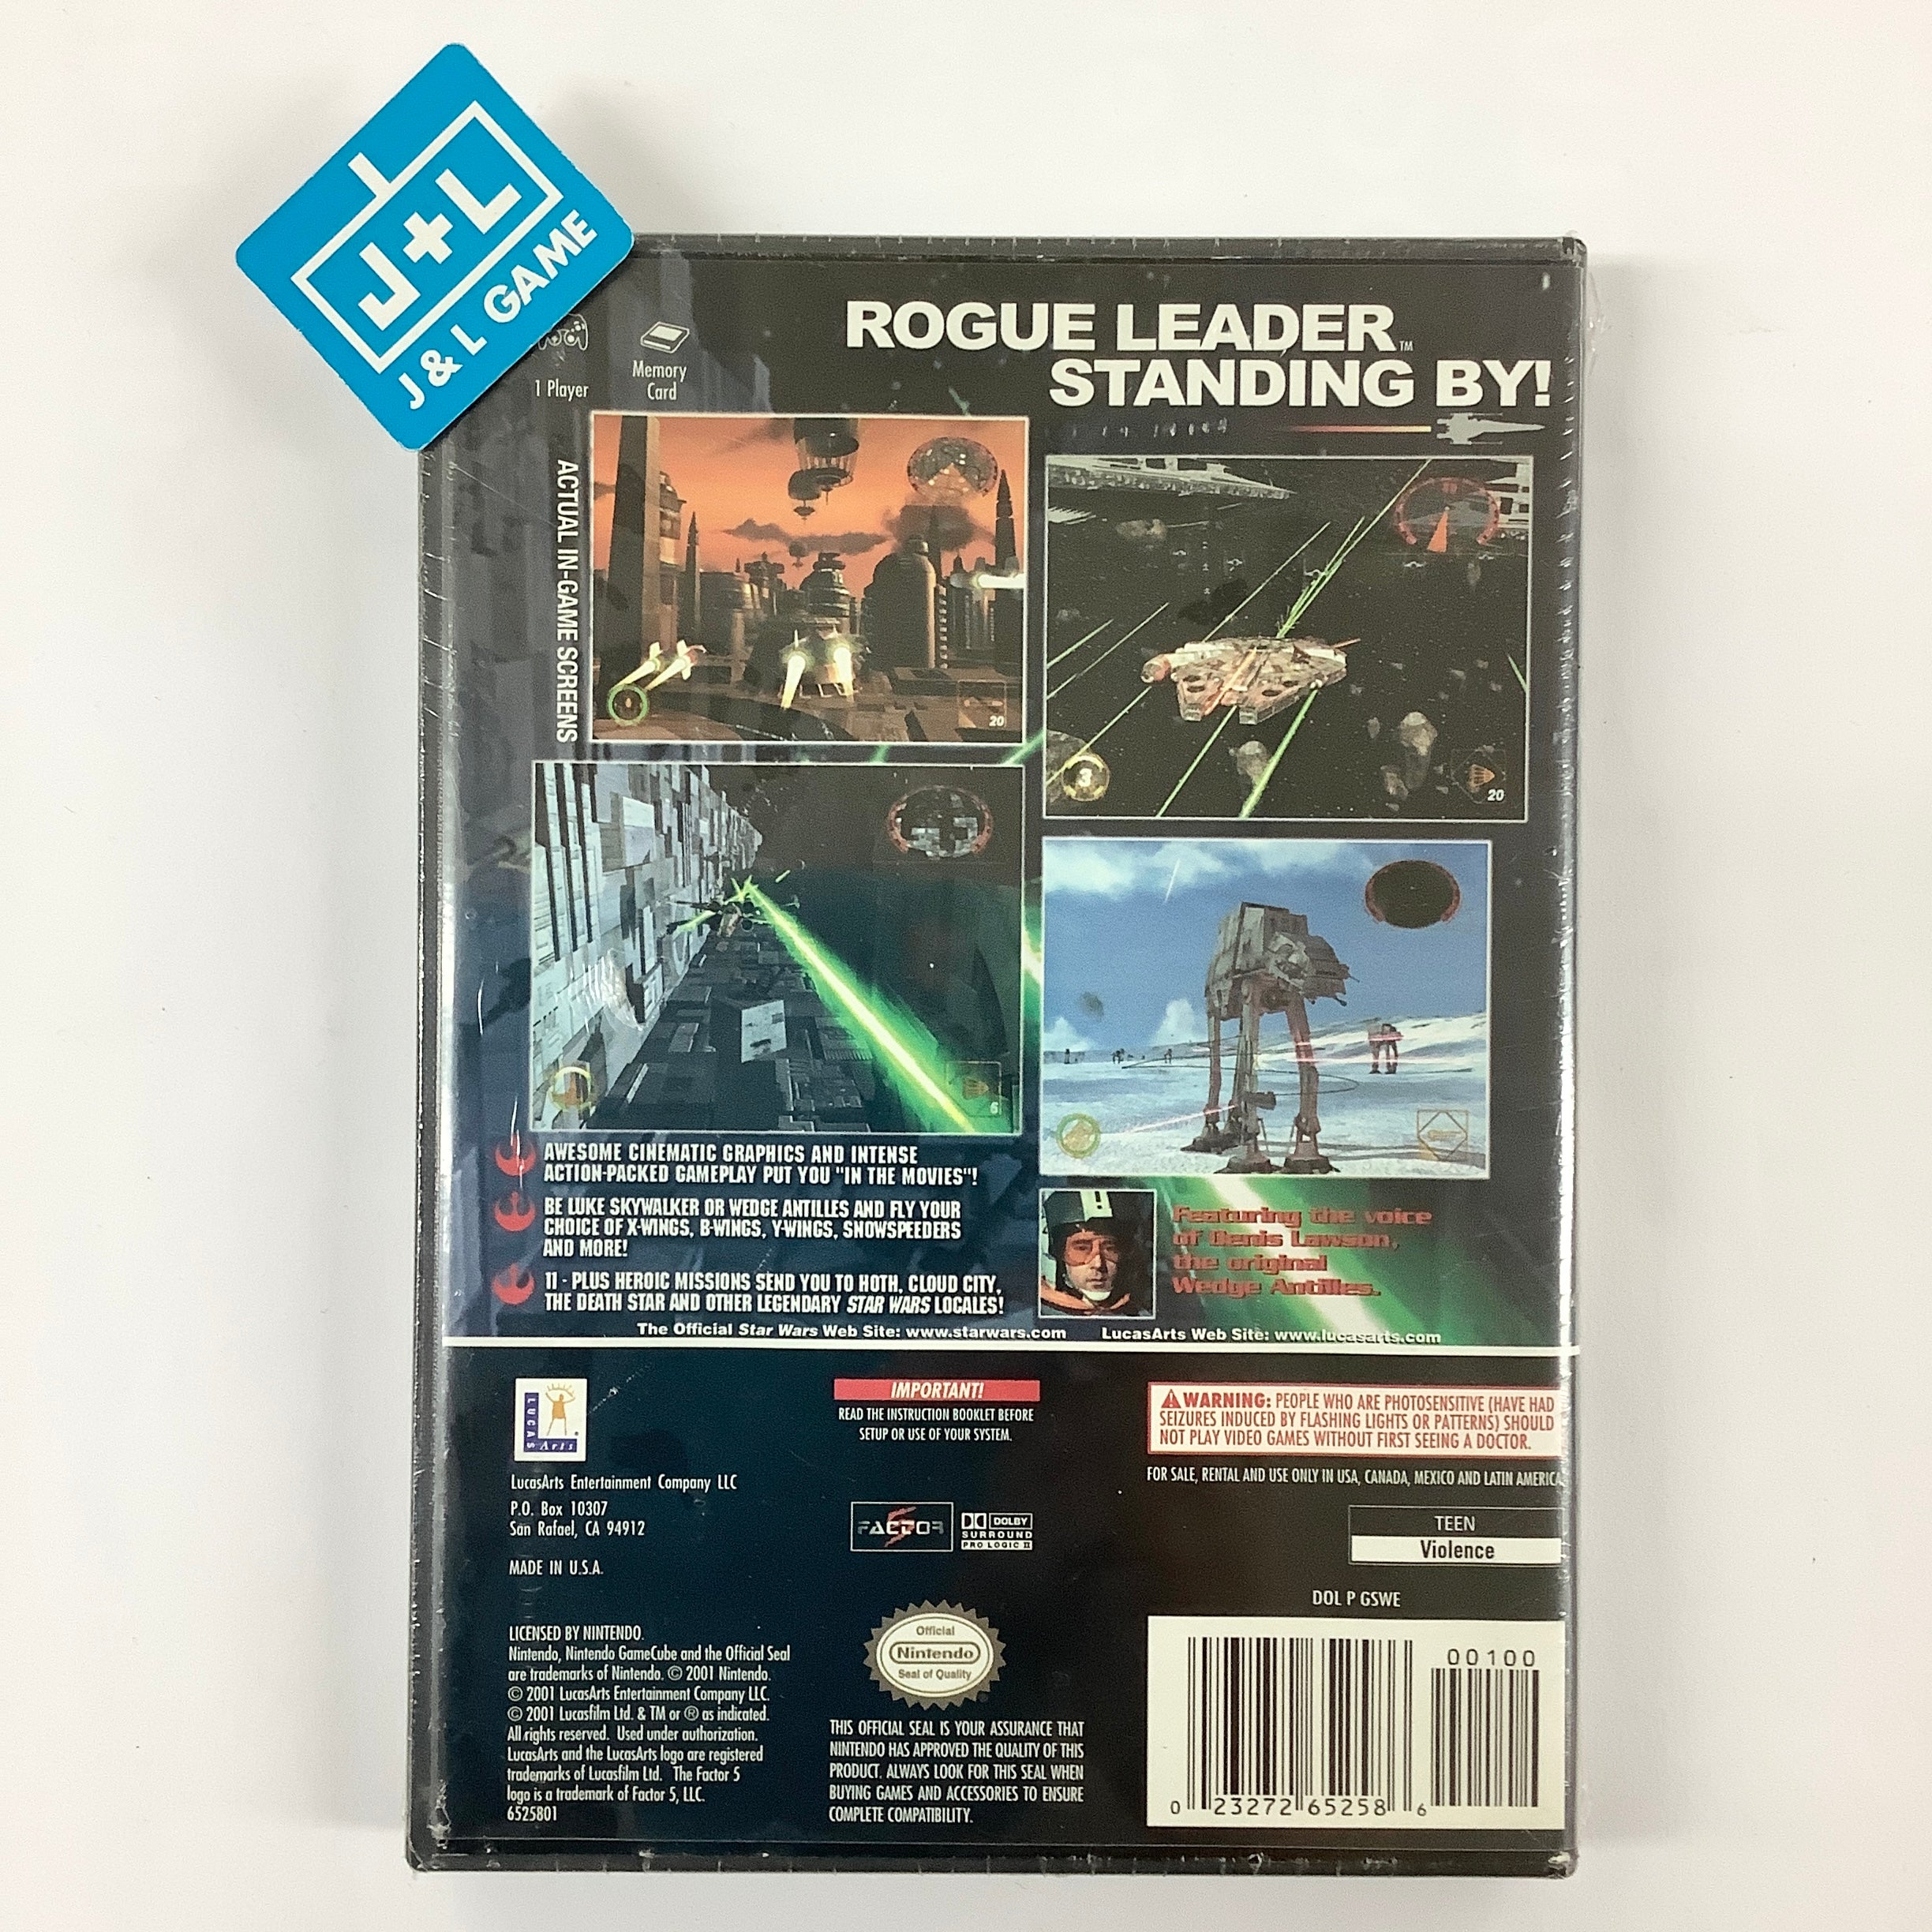 Star Wars Rogue Squadron II: Rogue Leader - (GC) GameCube Video Games LucasArts   